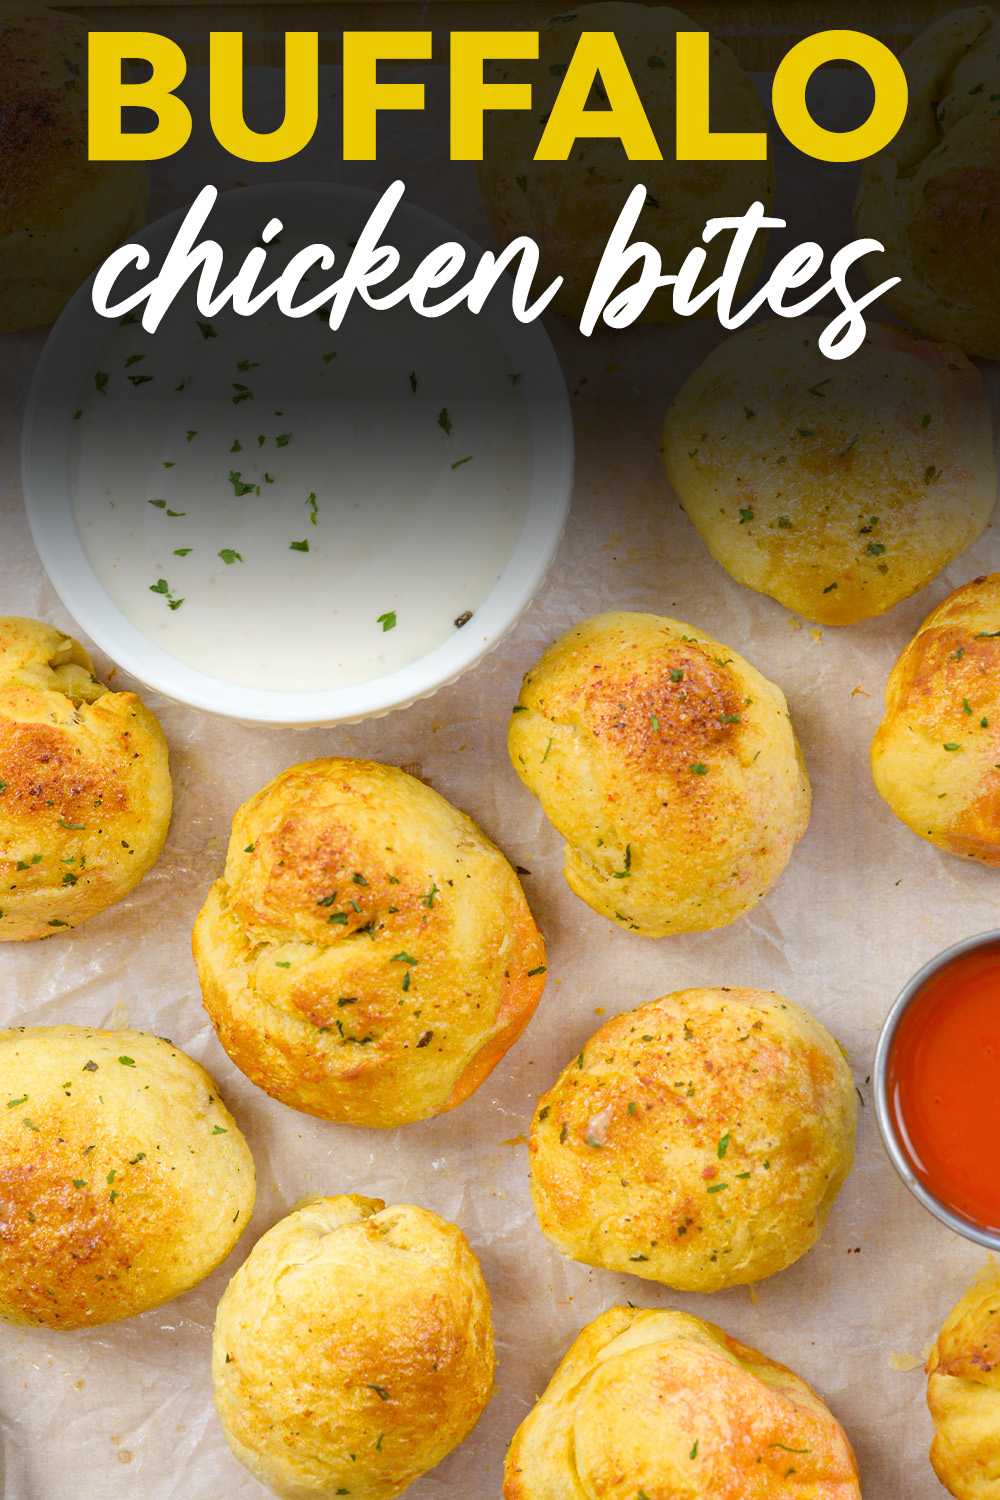 These buffalo chicken bites are simple snacks that you make in your air fryer!